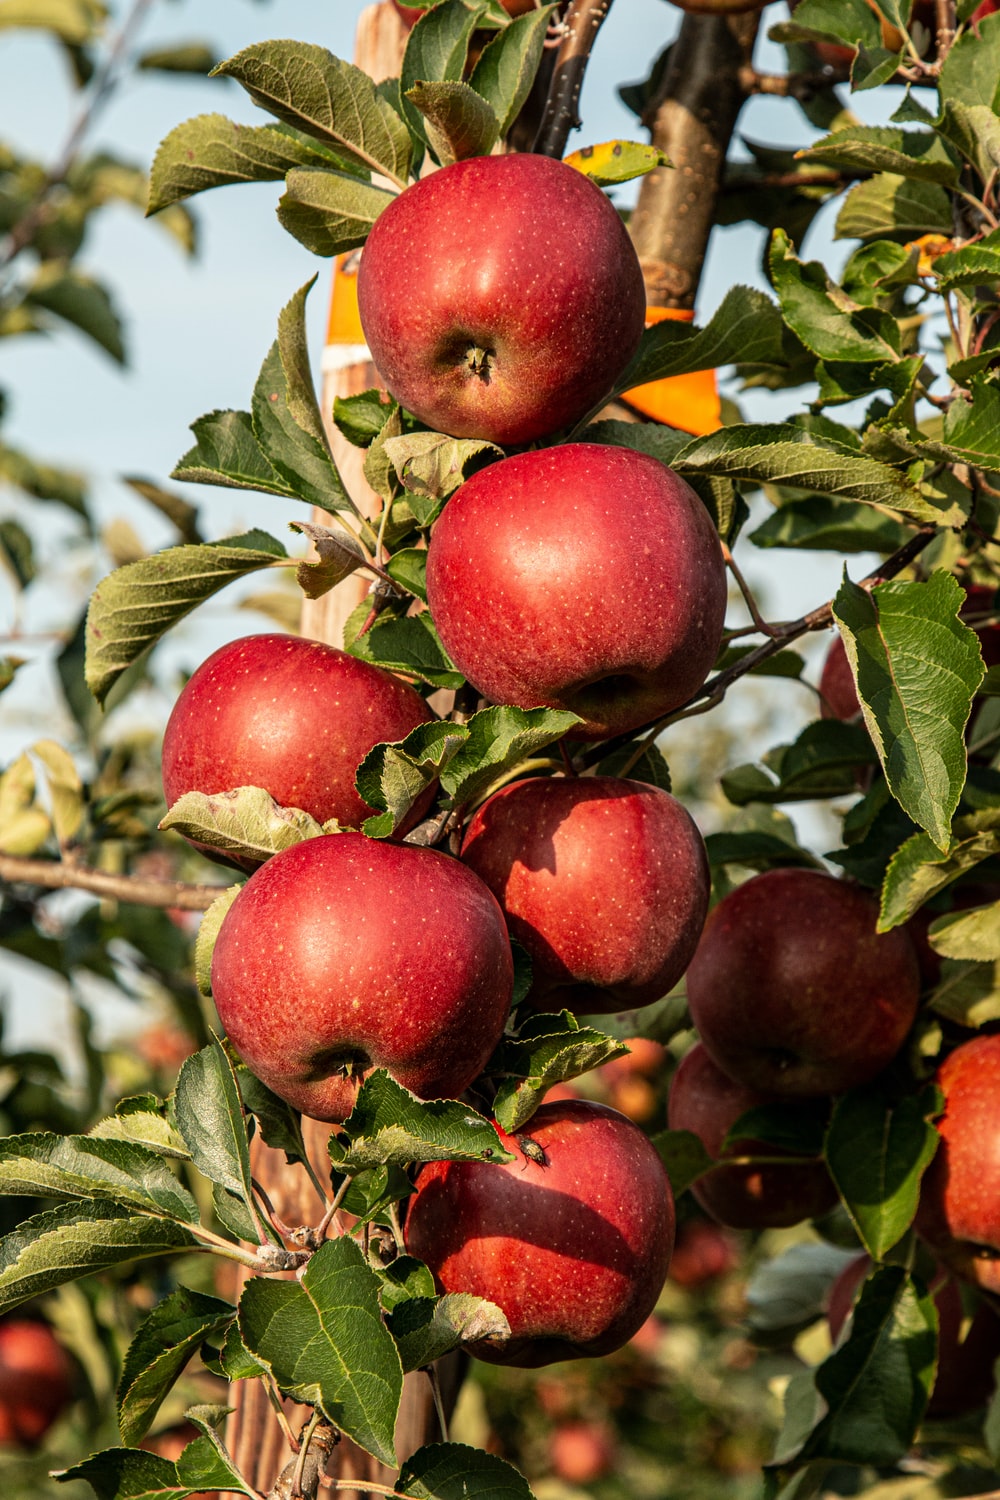 Fruit Trees Picture. Download Free Image